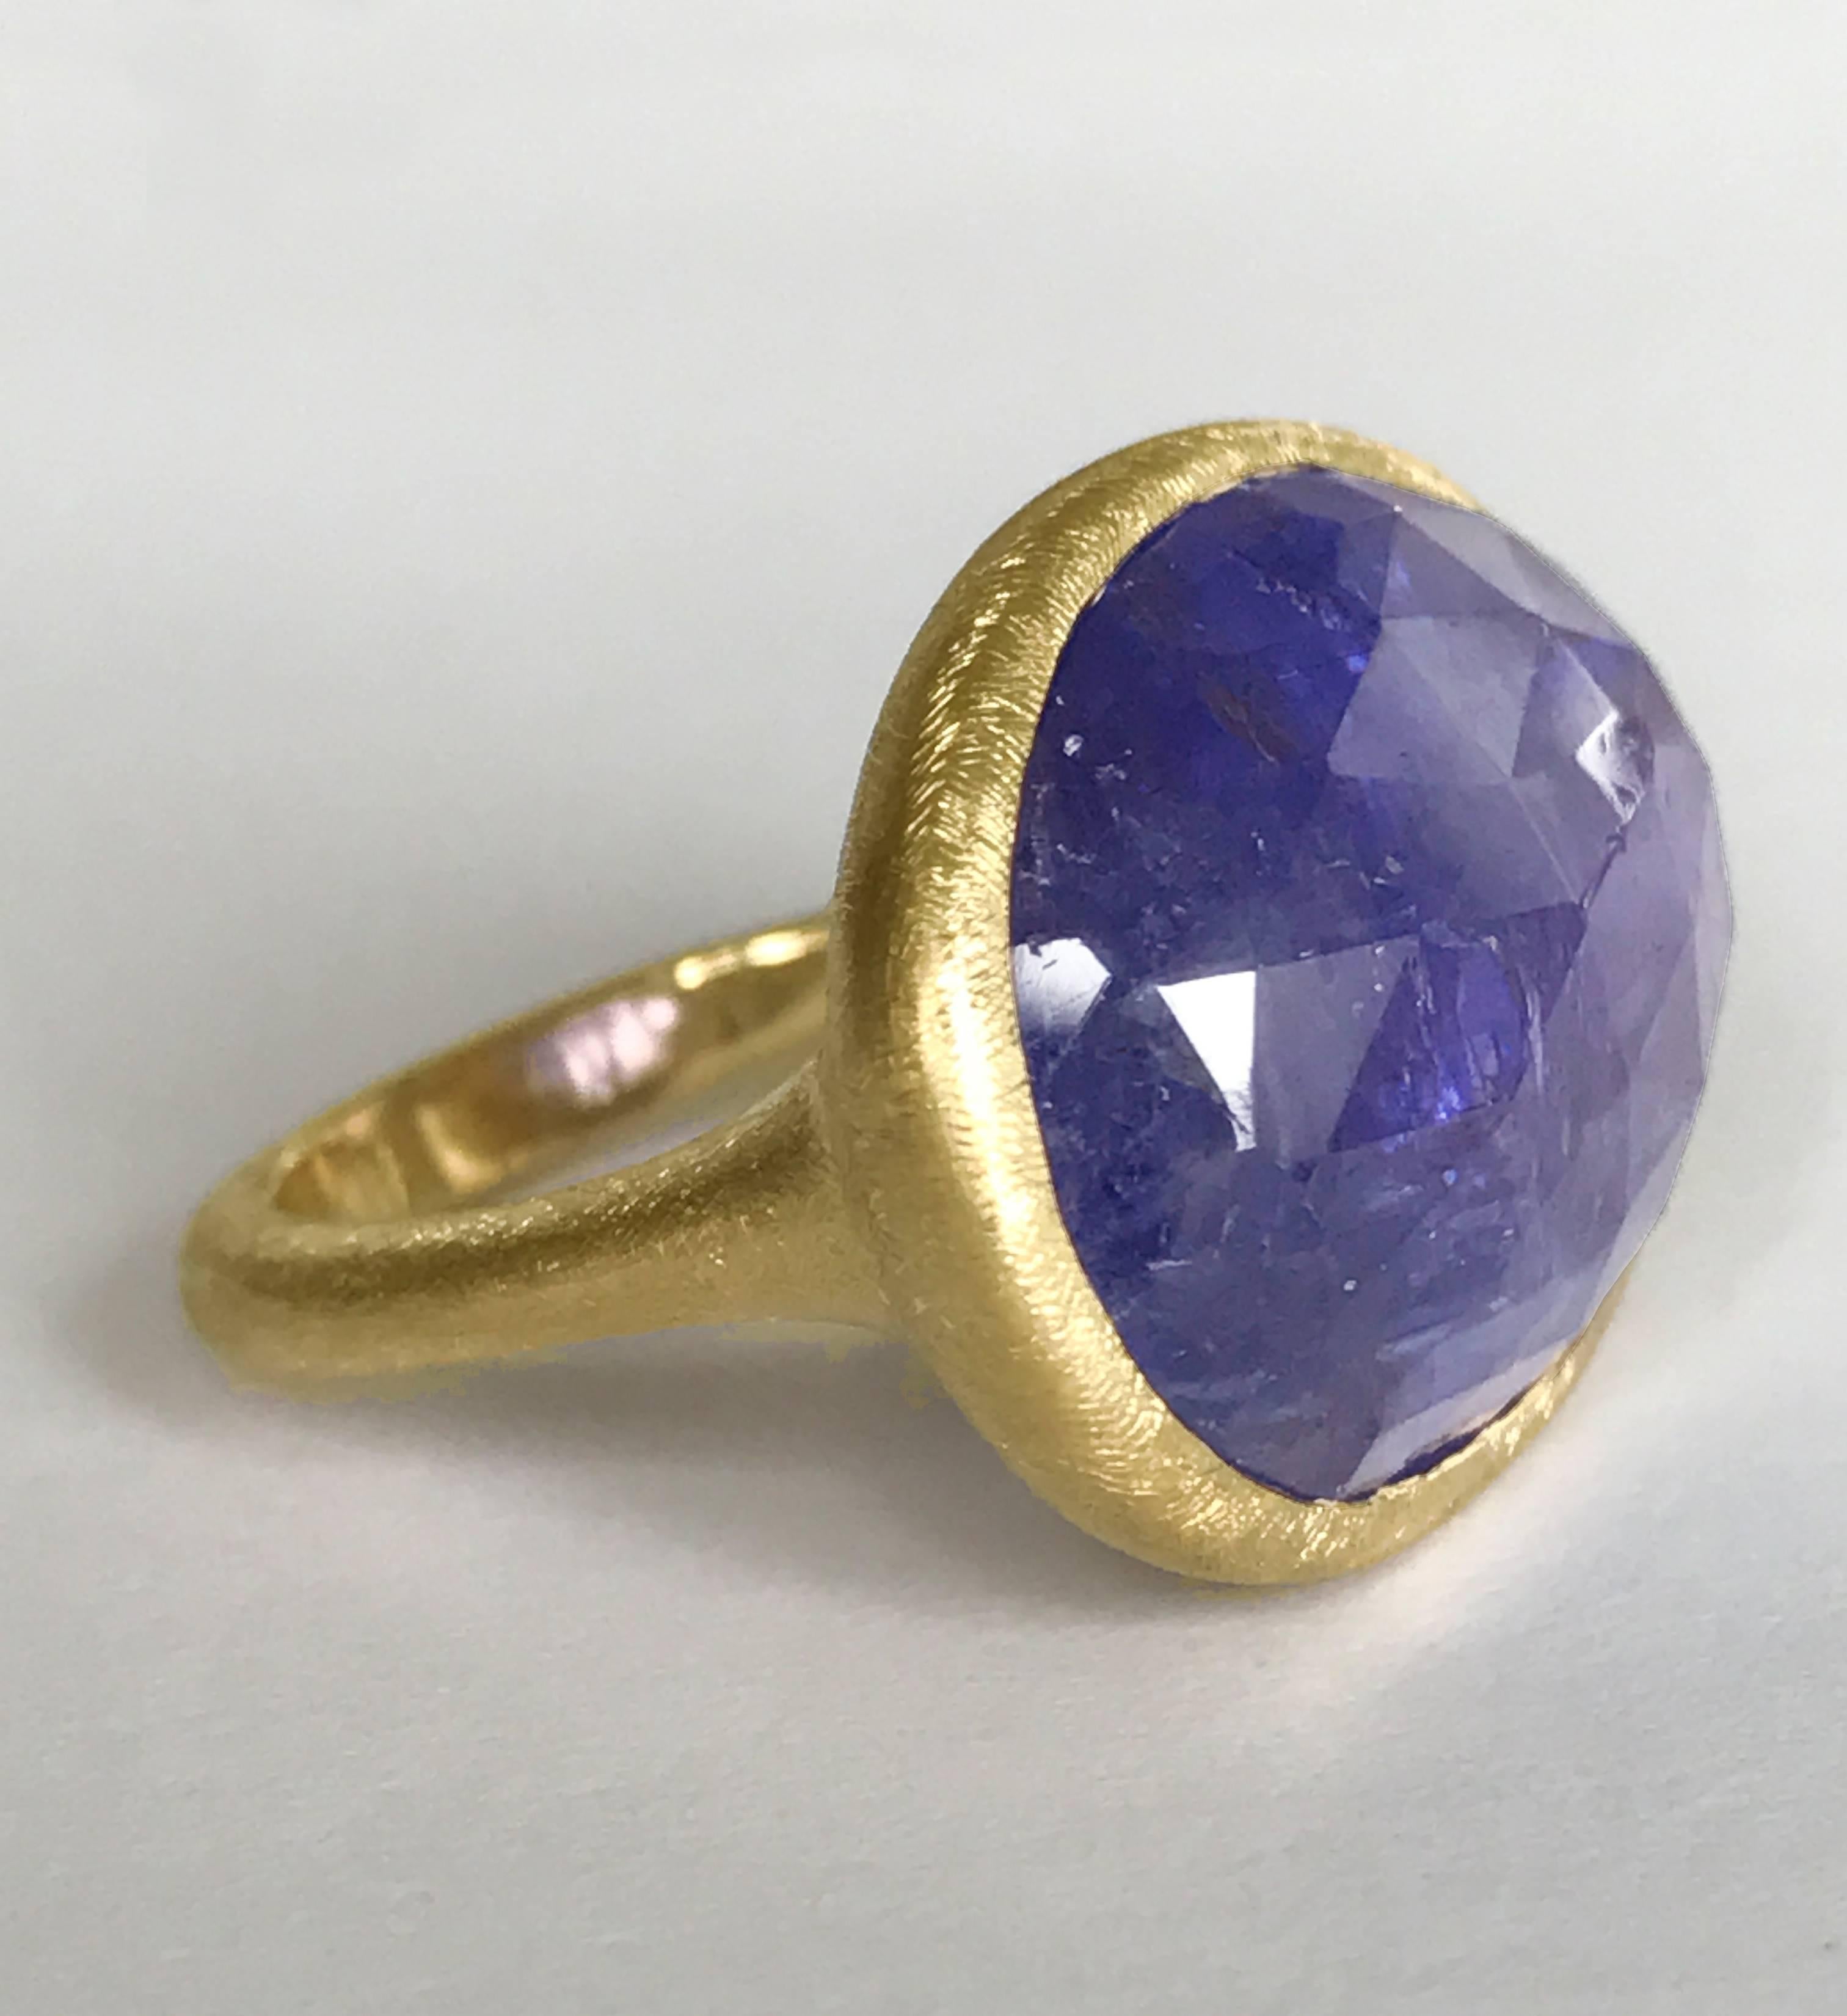 Dalben design One of a Kind 18k yellow gold scratch handmade finishing ring with a 19,64 carat bezel-set faceted Tanzanite.  Ring size 6 3/4 - EU 54 re-sizable to most finger sizes. 
Bezel stone dimensions :  
width 23,24 mm  
height 17,50 mm 
The